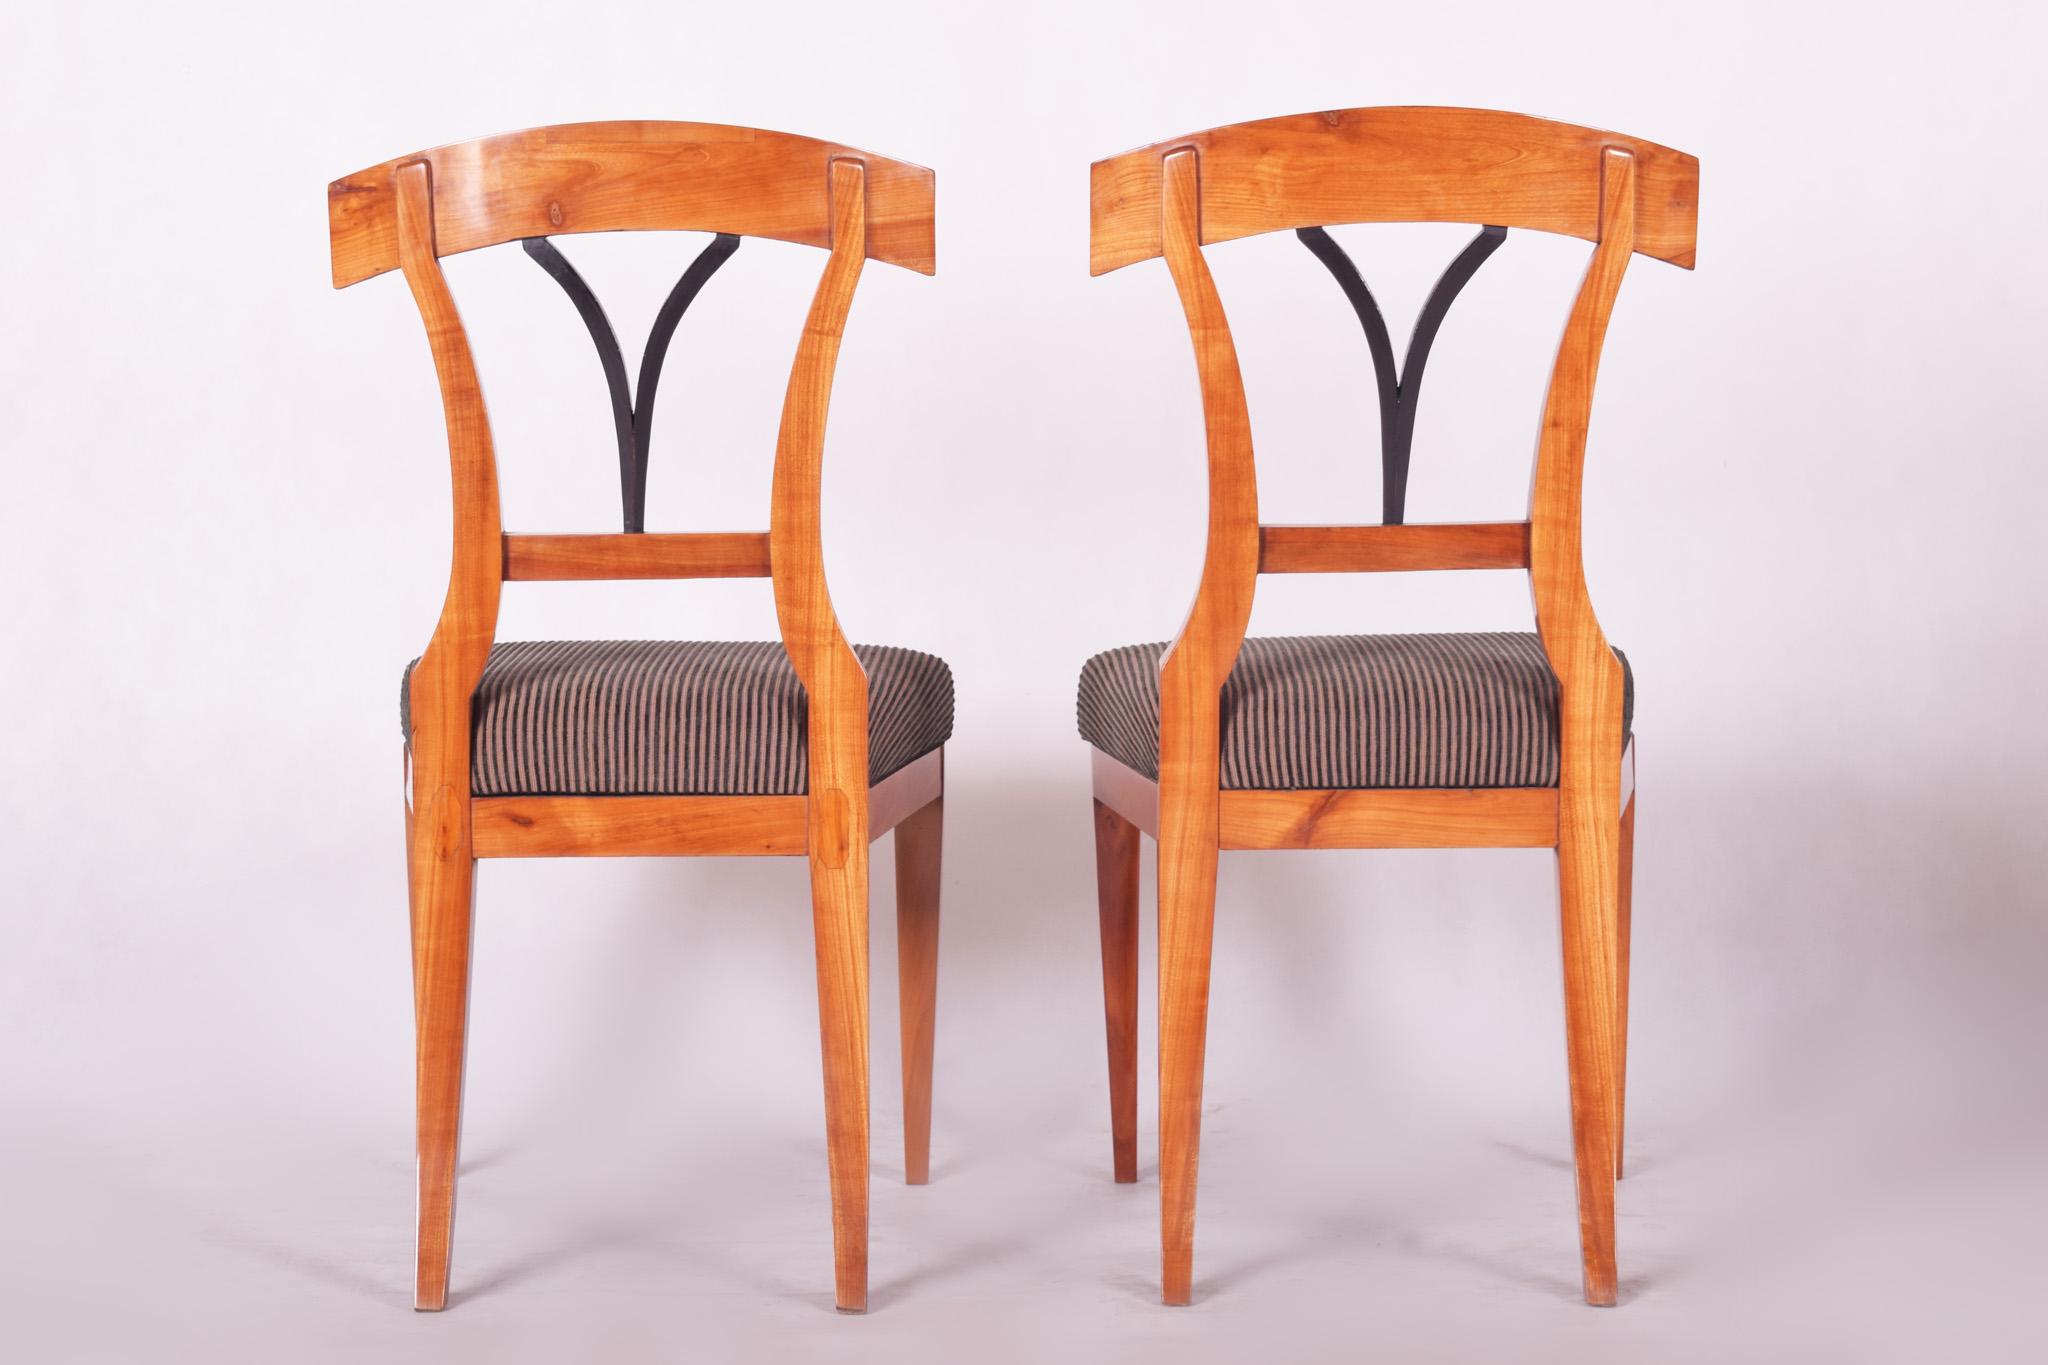 Pair of 19th Century Biedermeier Dining Chairs Made in 1930s Czechia For Sale 1